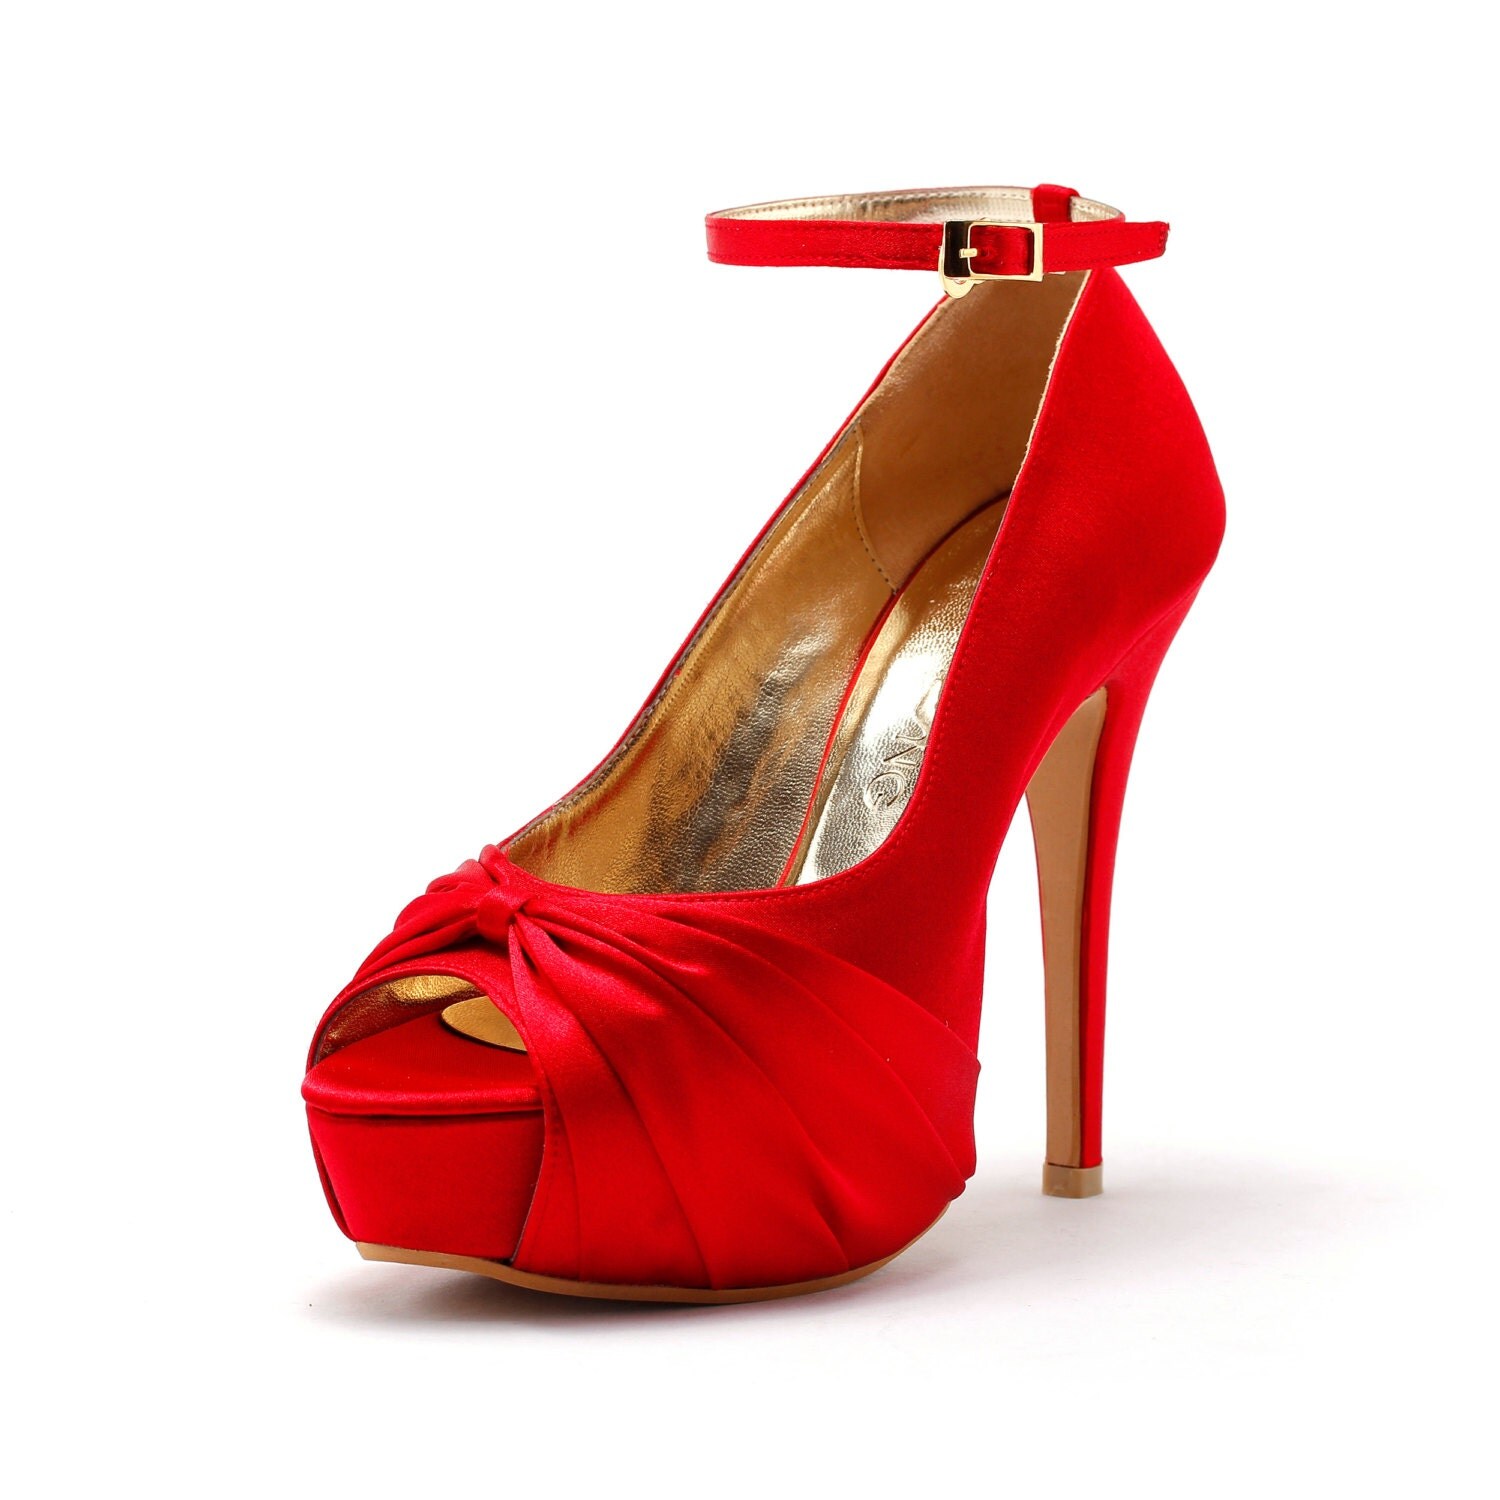 Giselle Red Satin Platfrom Wedding Heel with Ankle Strap Red